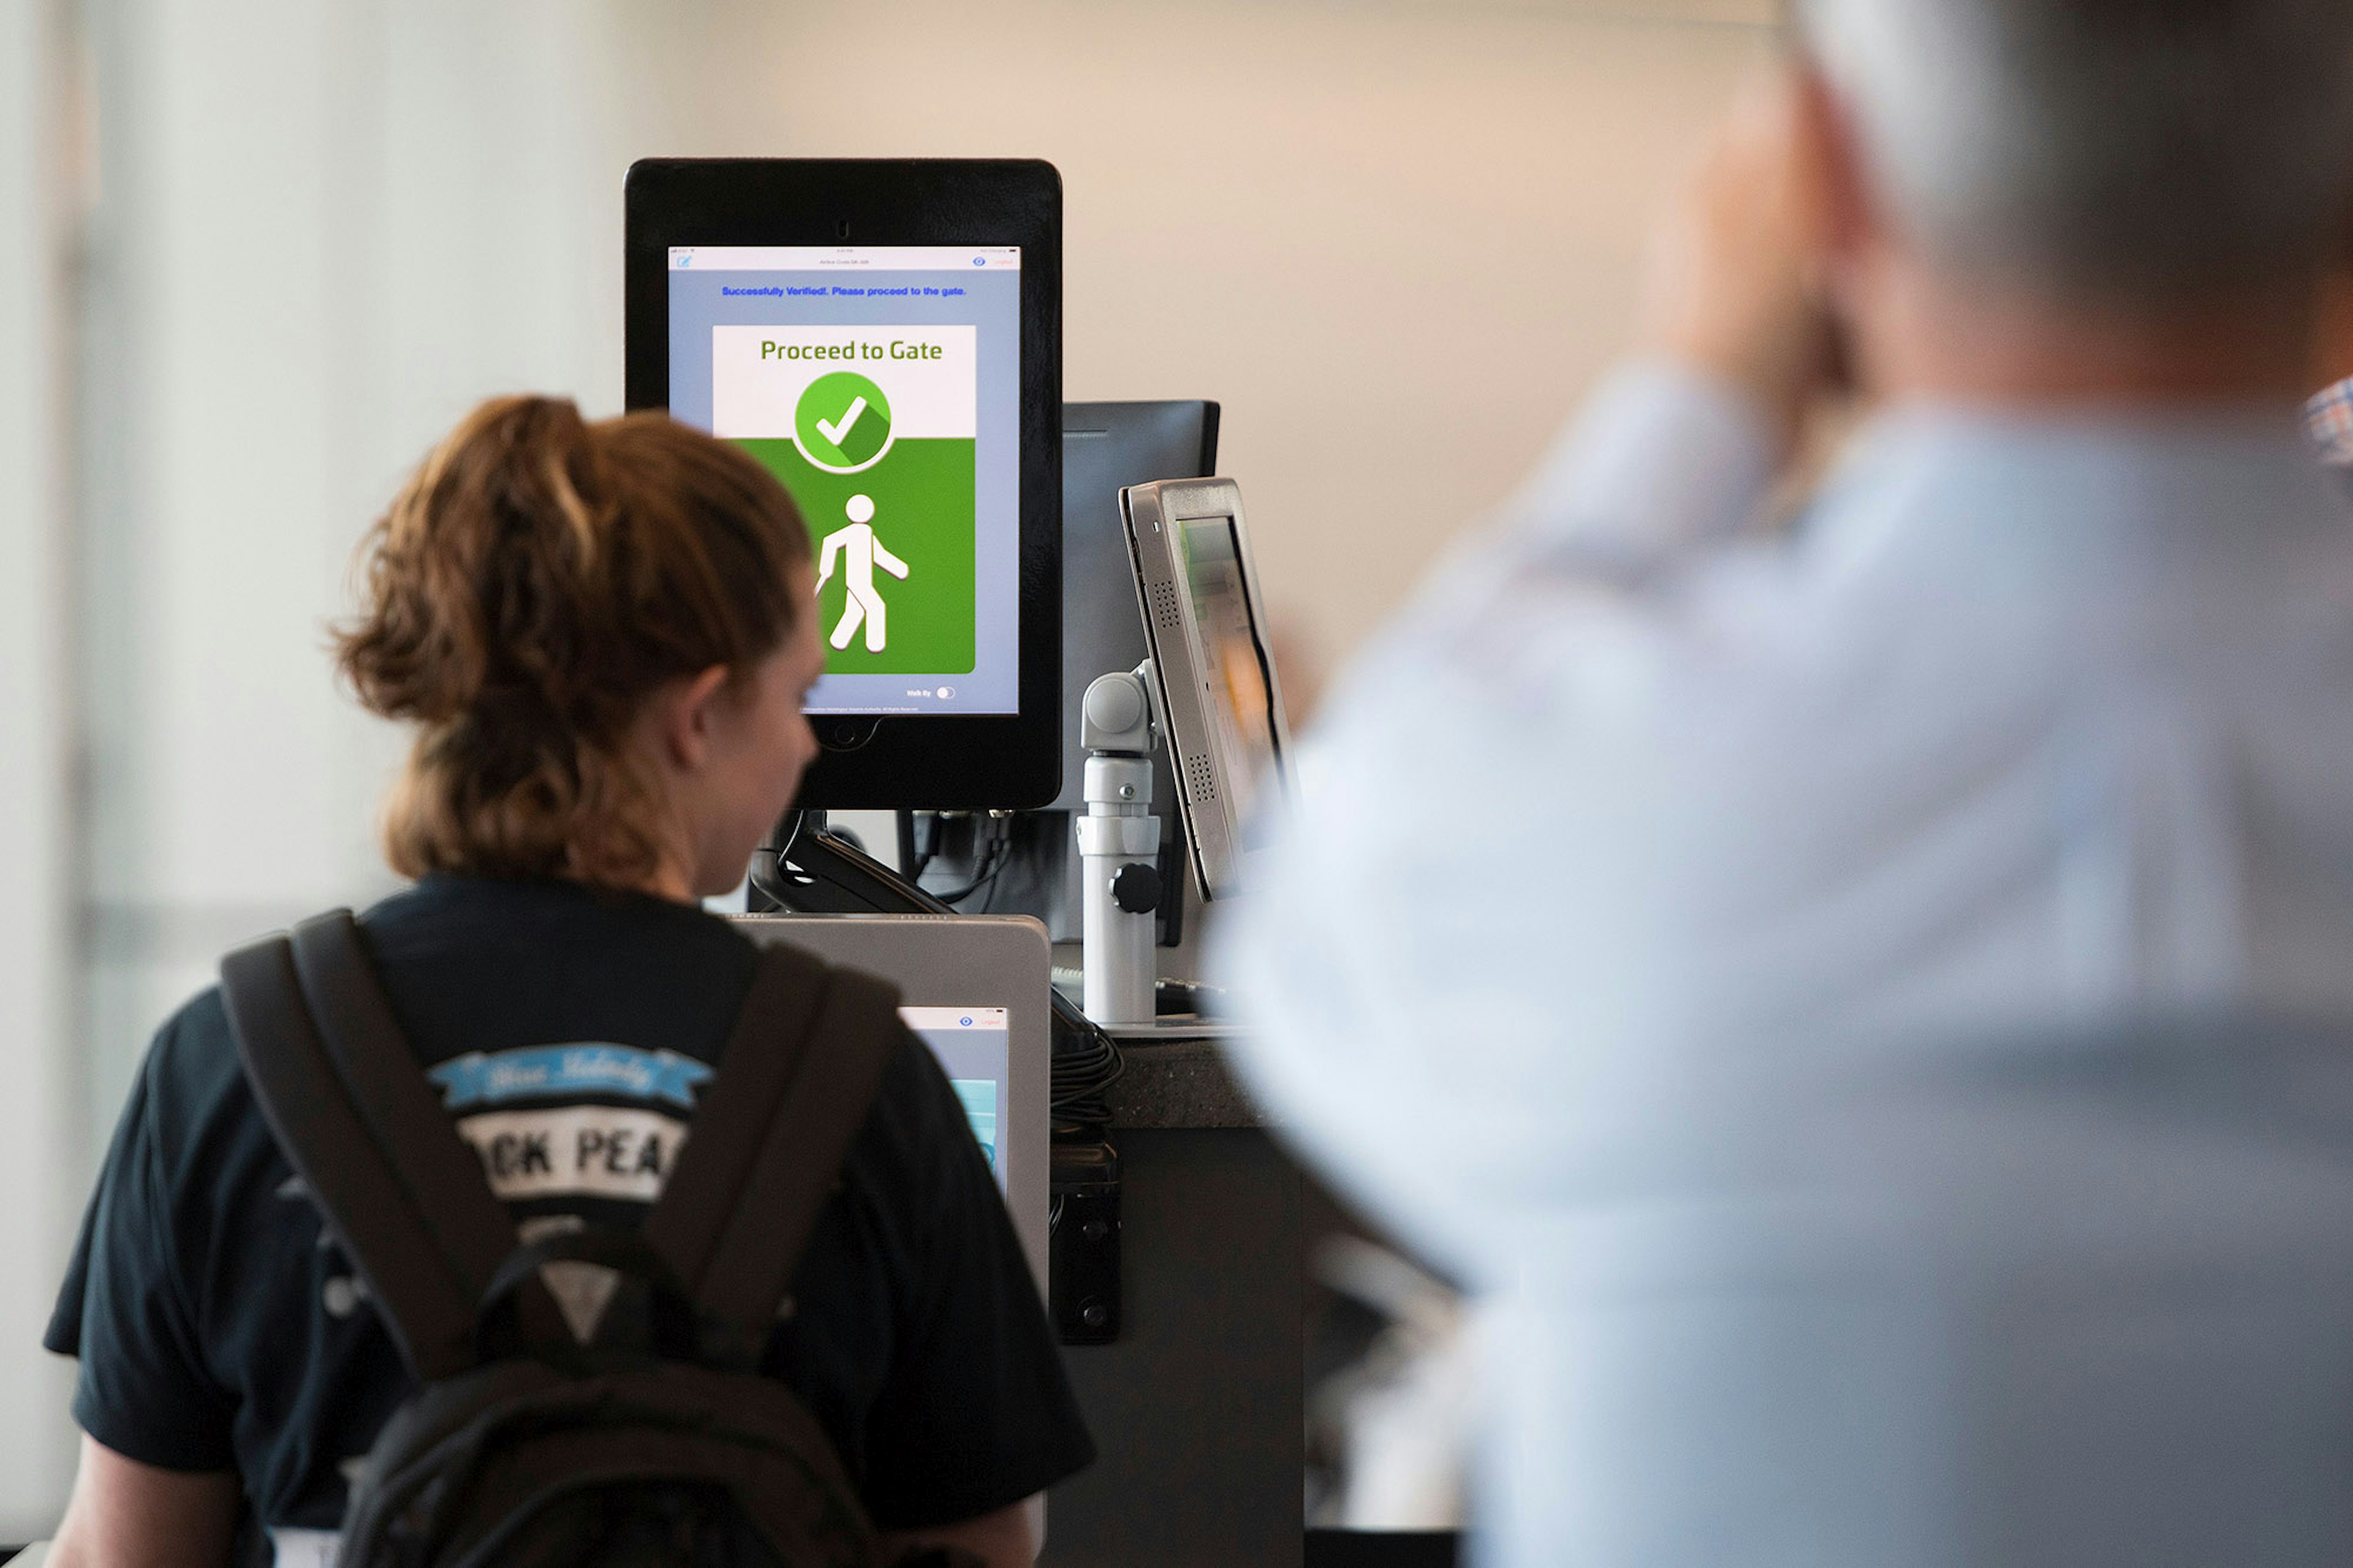 A woman boarding a SAS flight to Copenhagen goes through facial recognition verification system VeriScan at Dulles International Airport in Dulles, Virginia, on September 6, 2018. (Photo by Jim WATSON / AFP)        (Photo credit should read JIM WATSON/AFP via Getty Images)